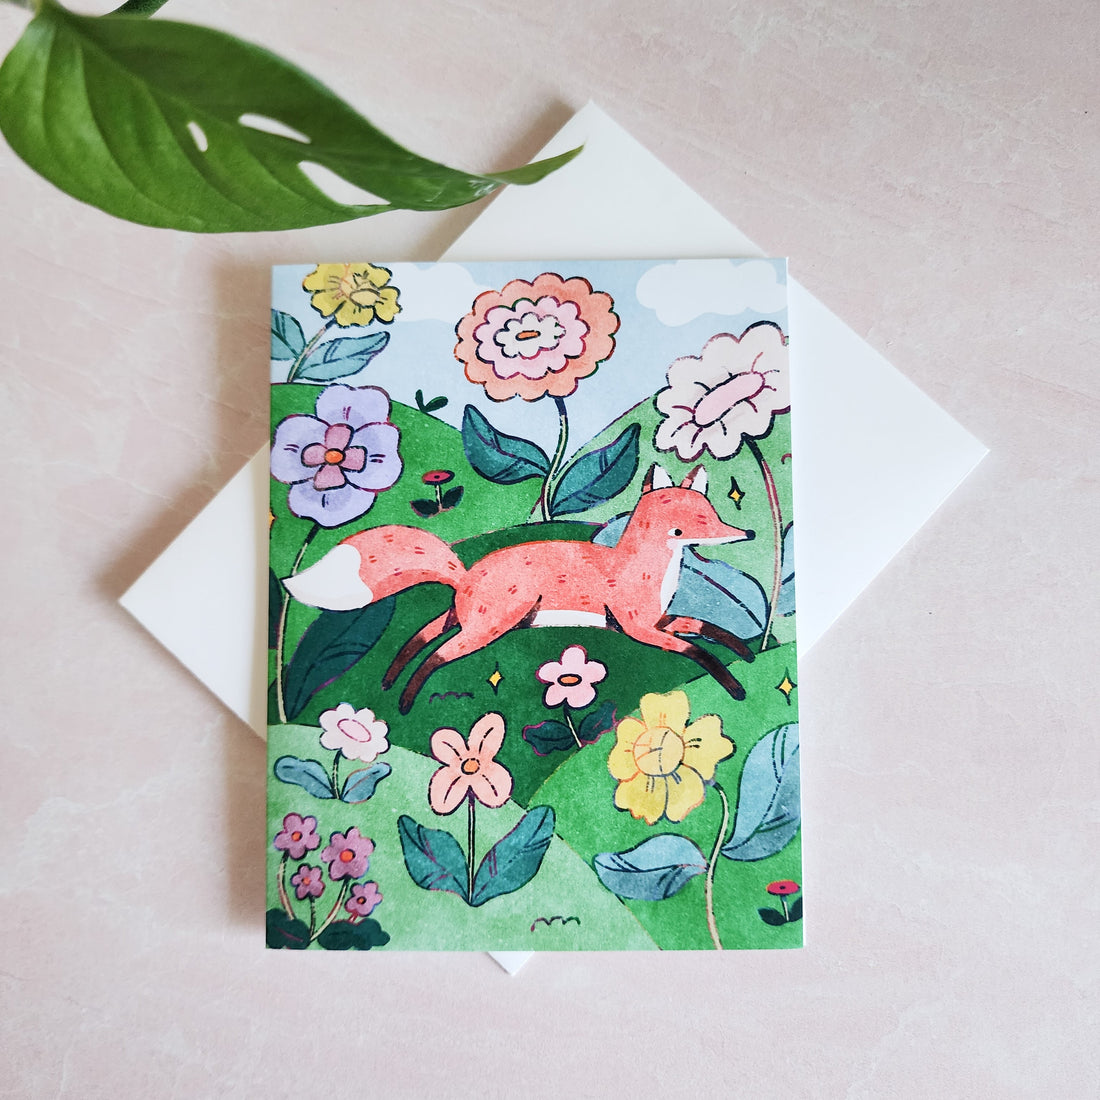 greeting card with a fox illustration on a white envelope